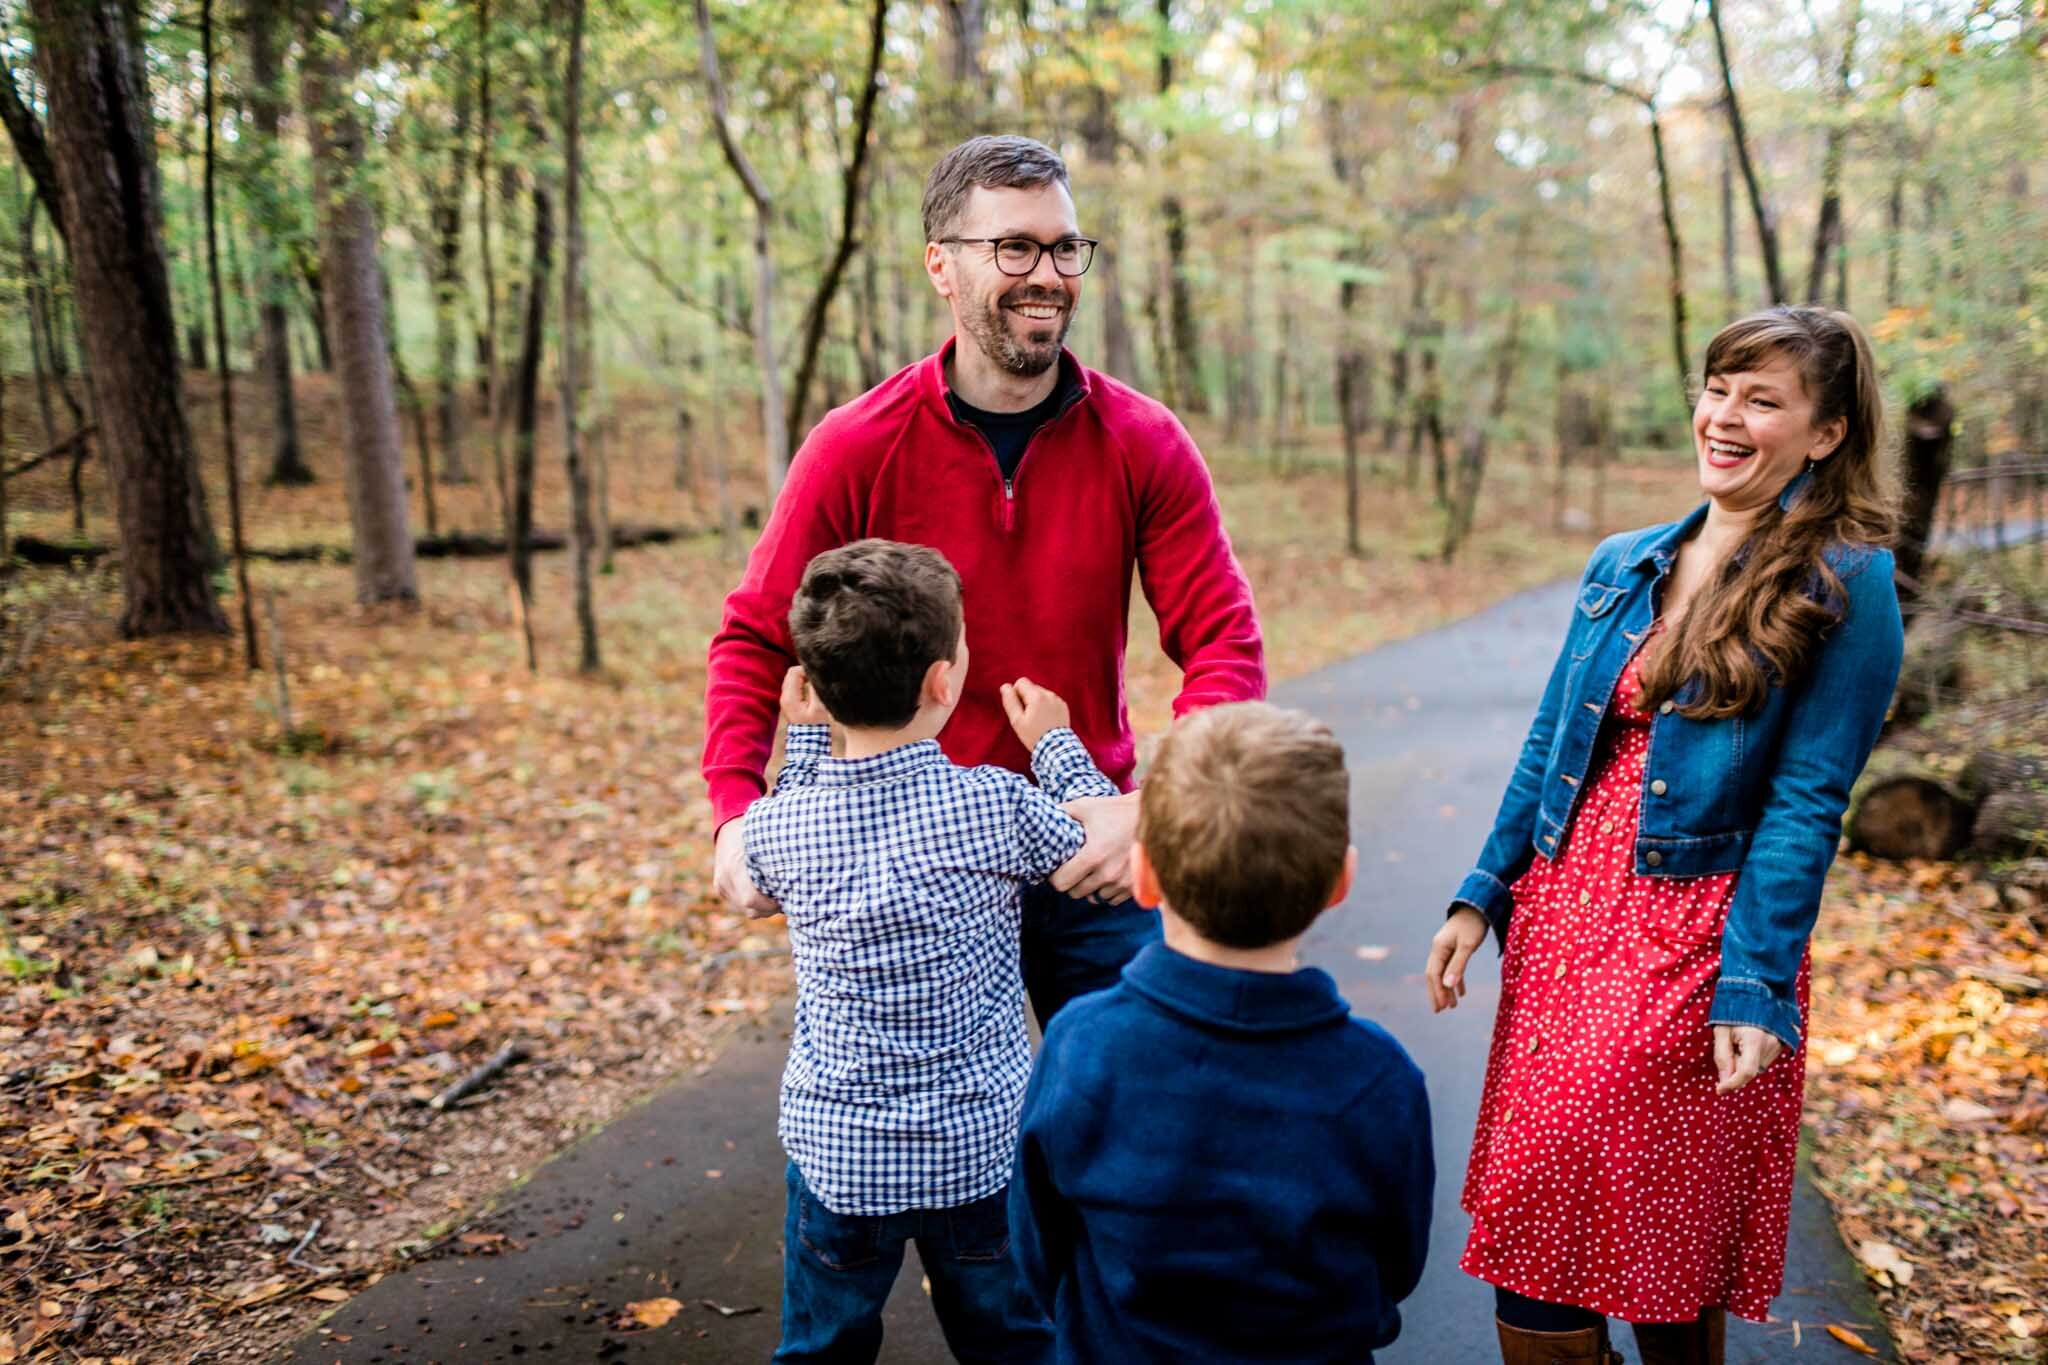 Raleigh Family Photographer | By G. Lin Photography | Umstead Park | Family laughing together and playing outside